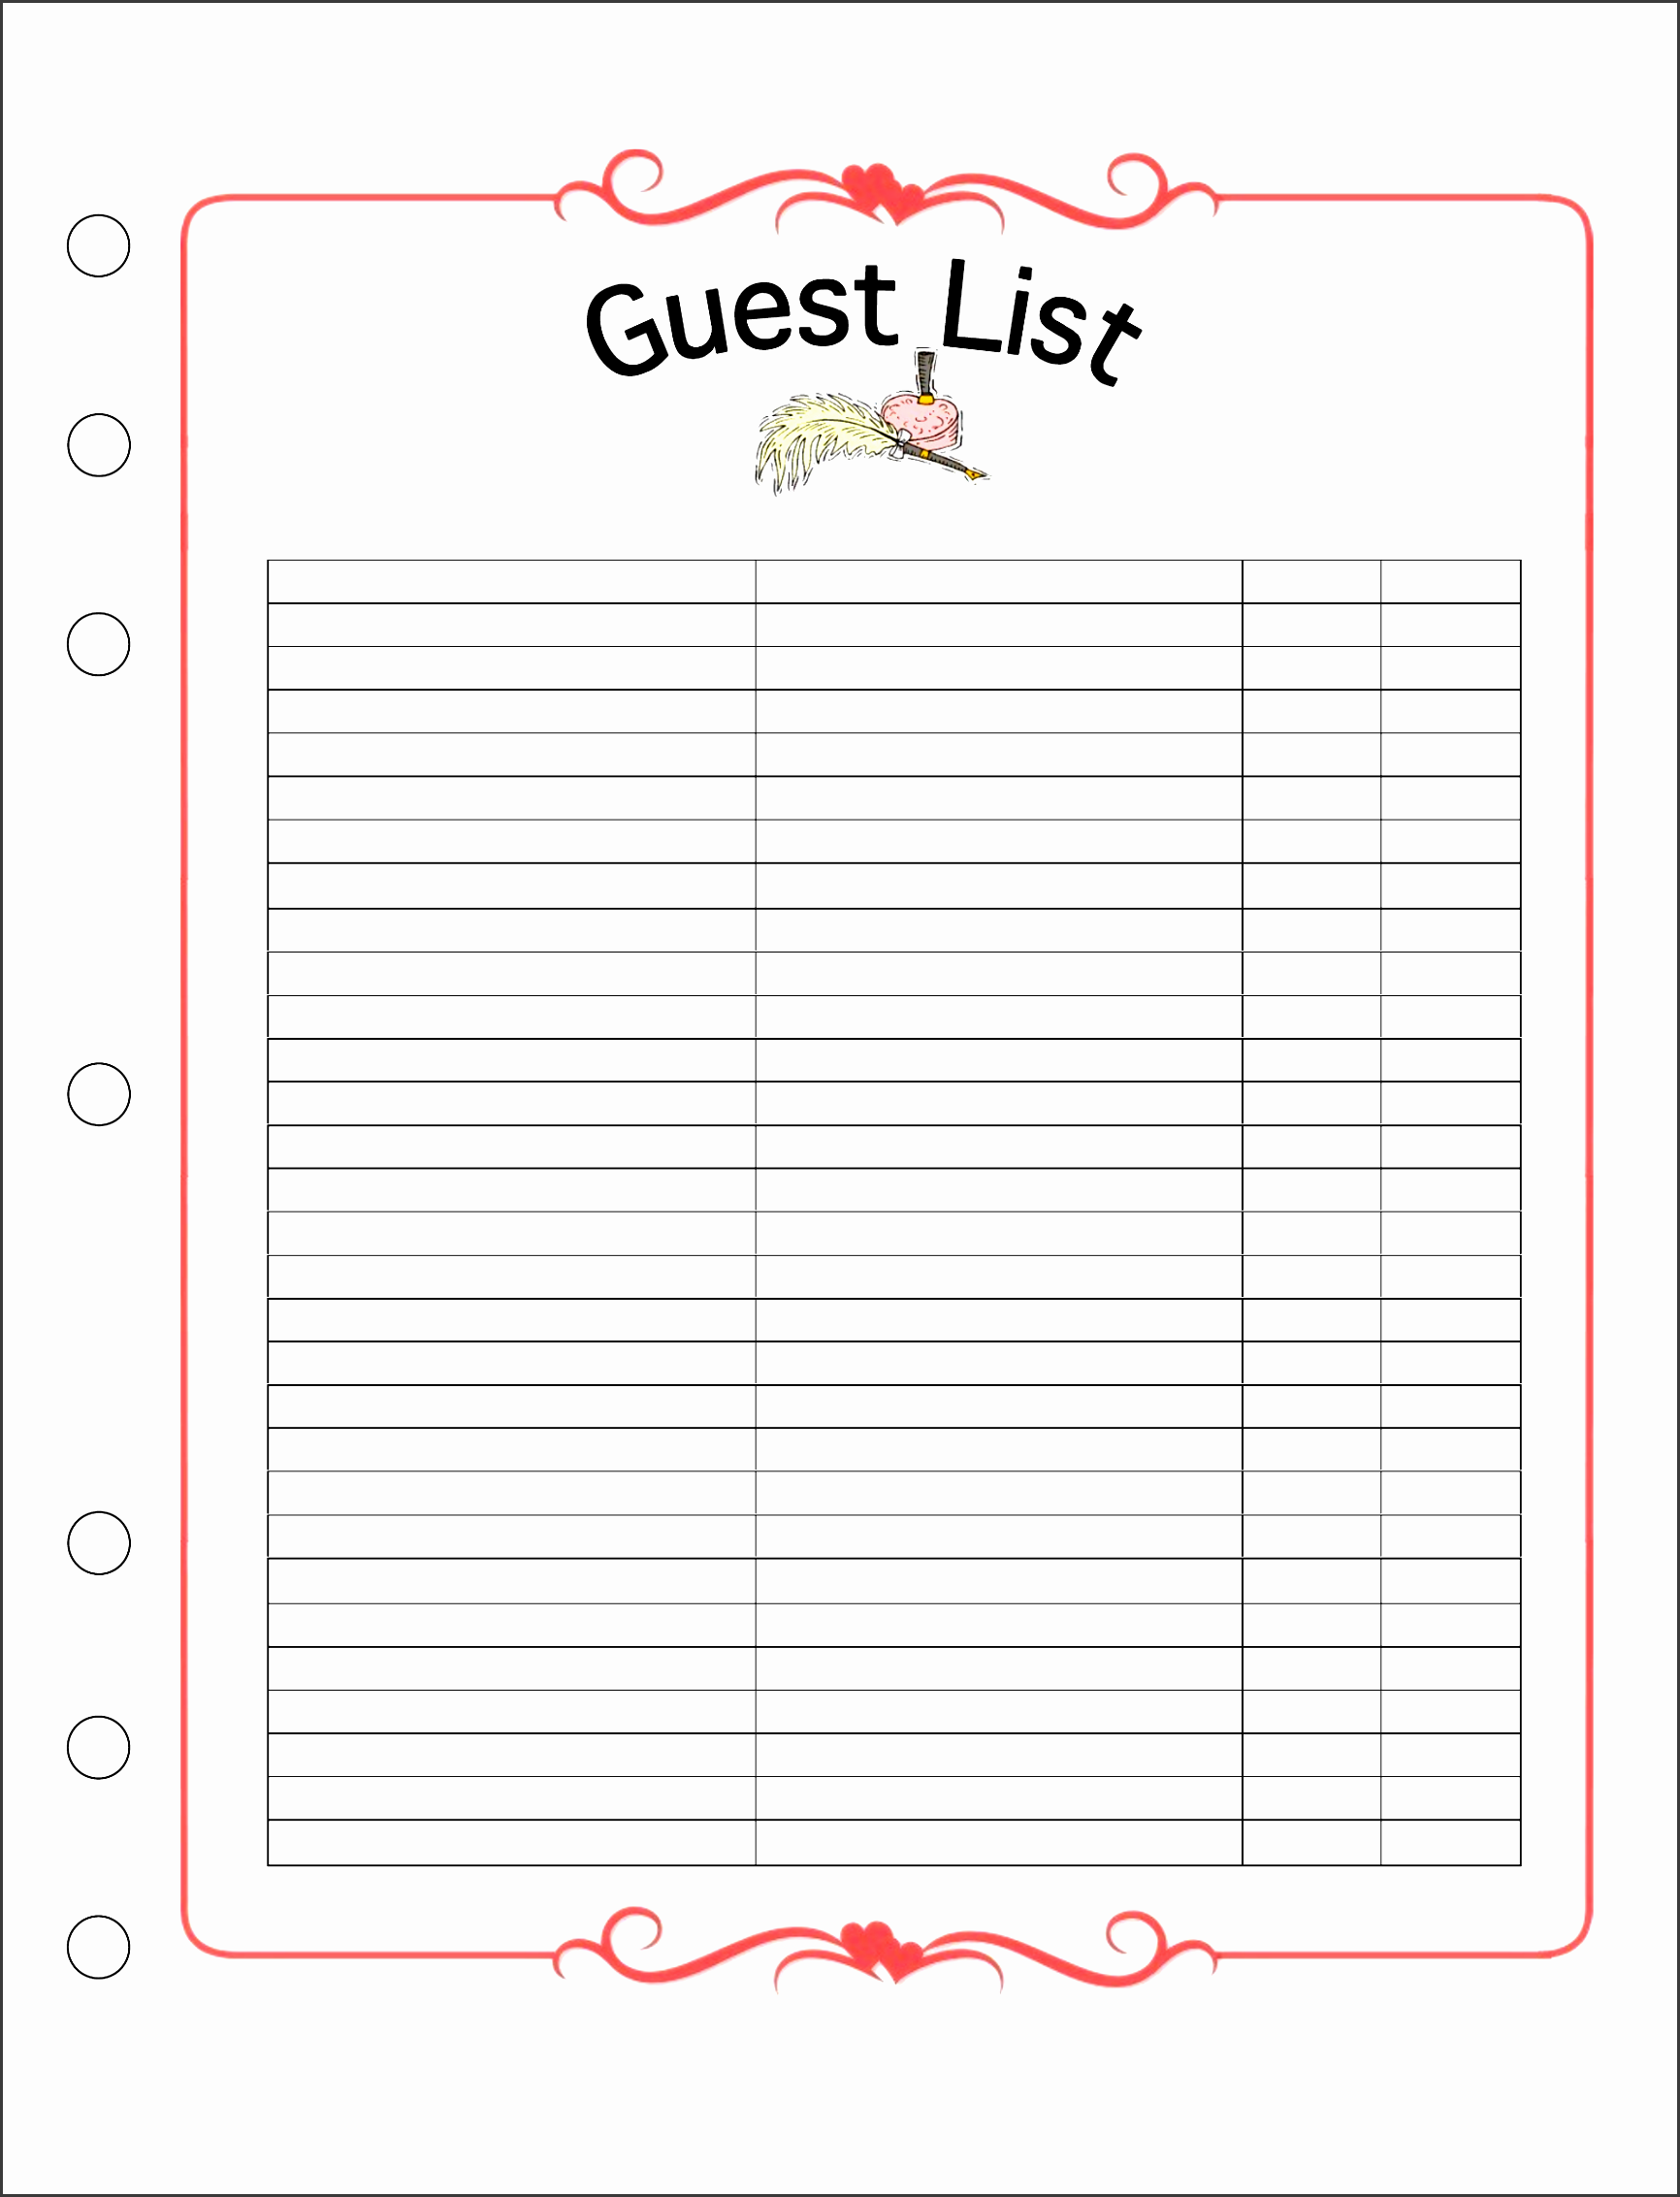 Free Printable Guest List Template - Printable Free Templates